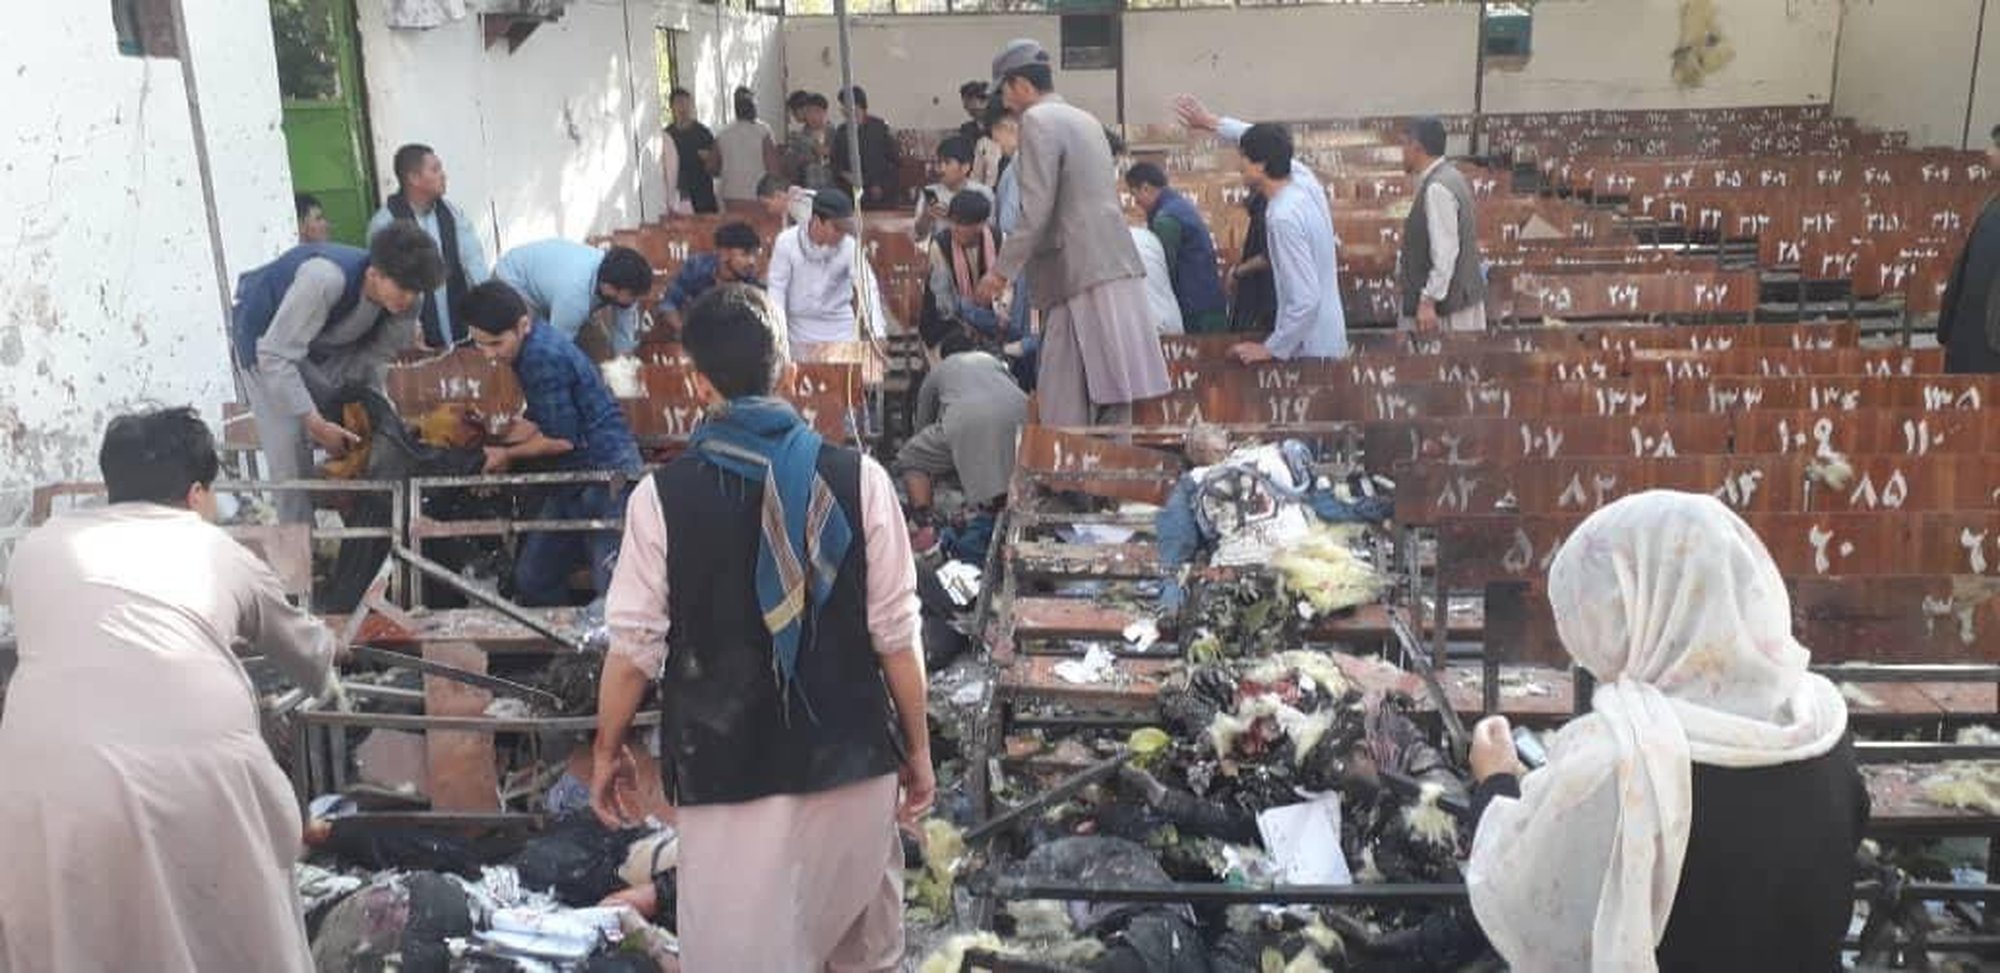 Afghanistan: A suicide bomber kills 19 people